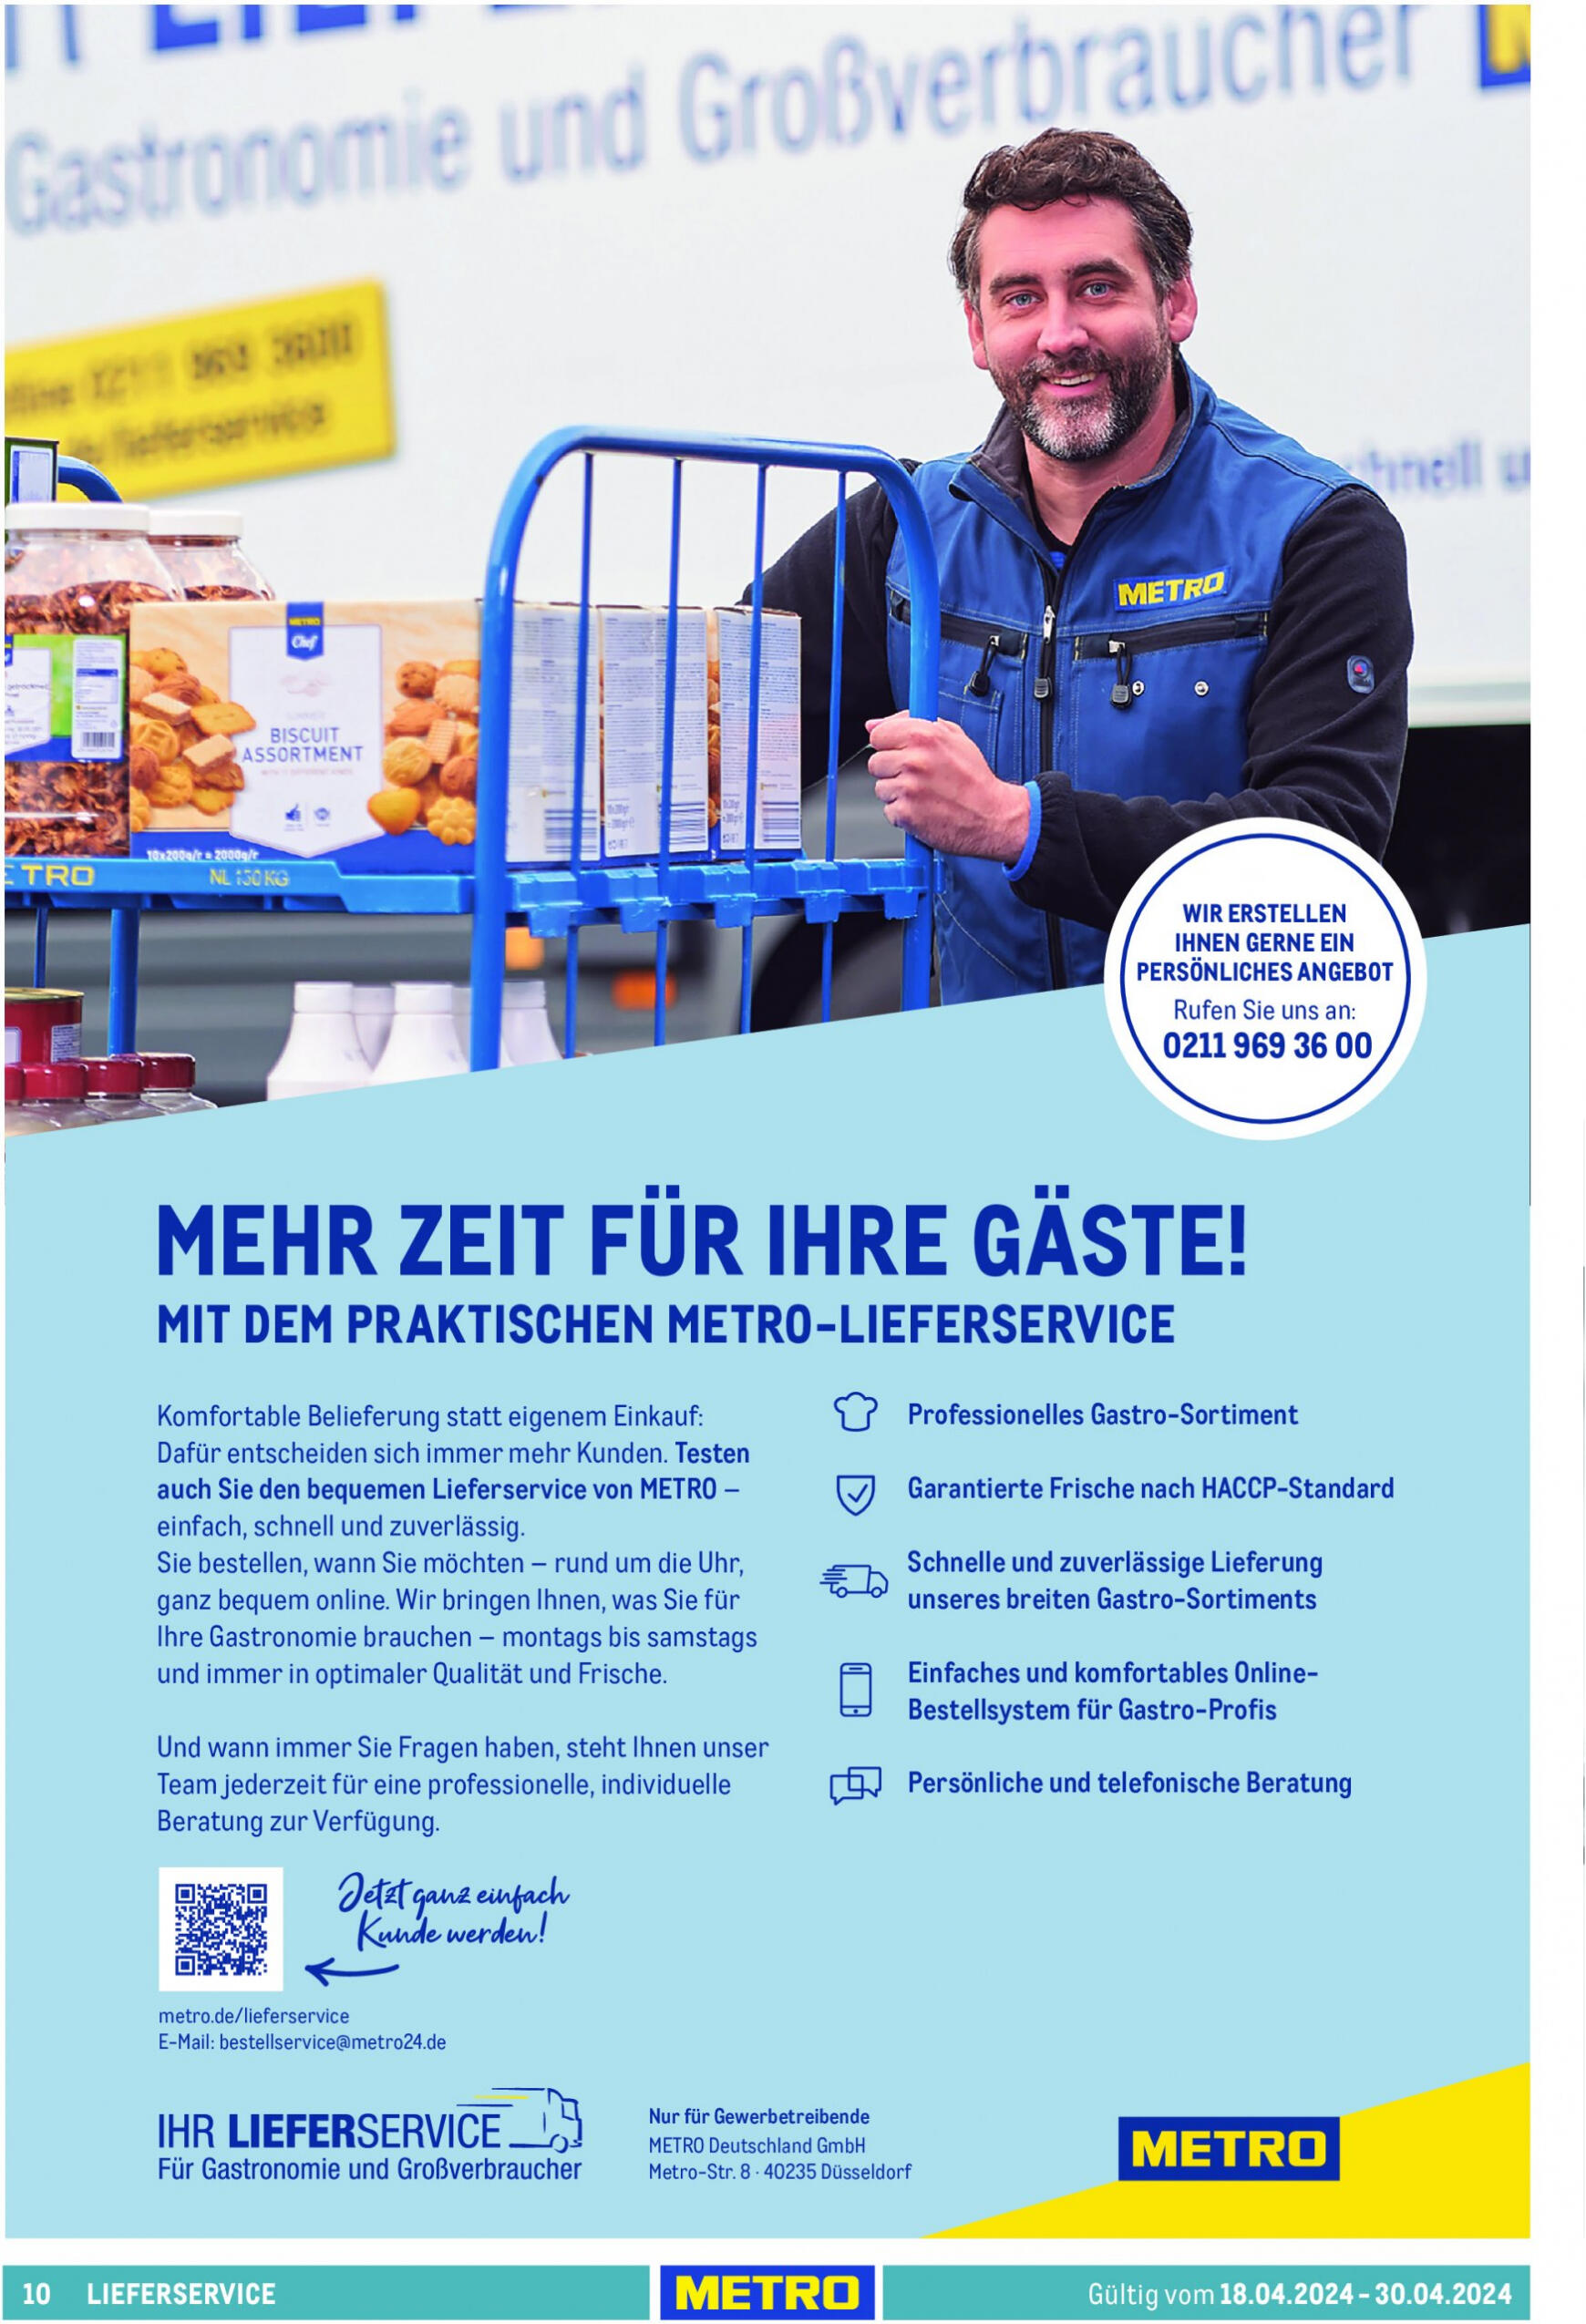 metro - Flyer Metro - GastroJournal aktuell 18.04. - 30.04. - page: 12